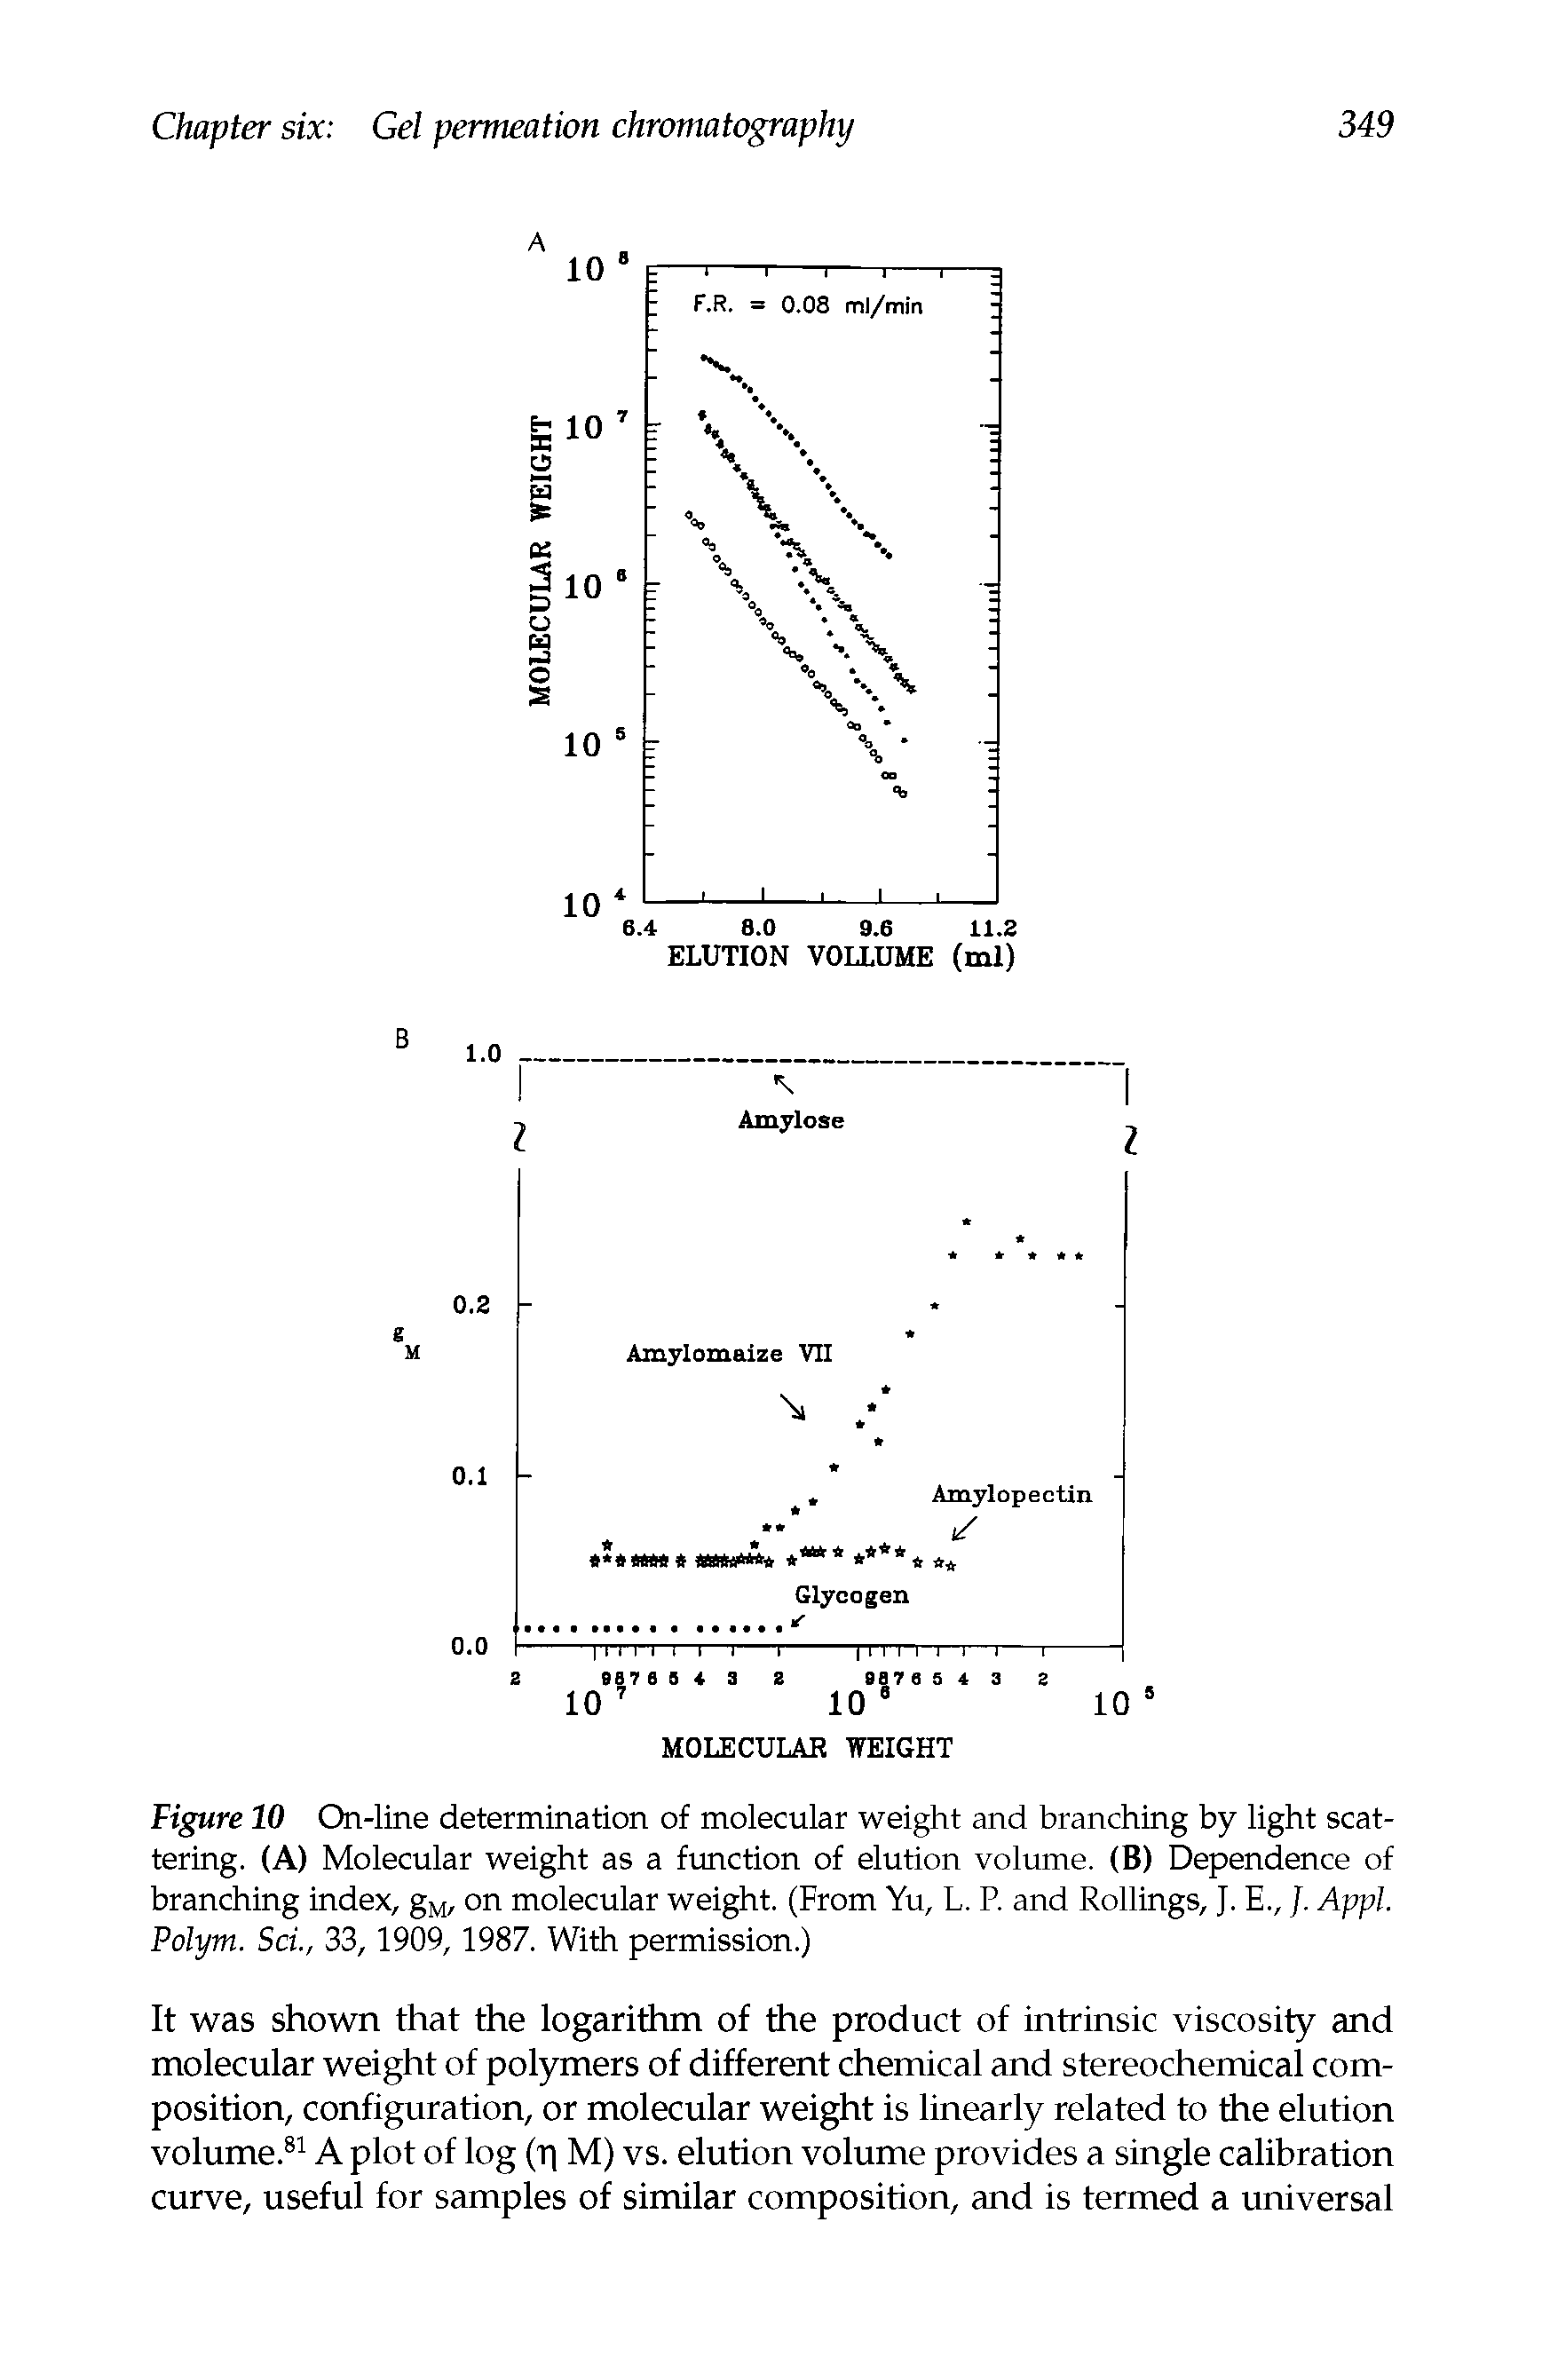 Figure 10 On-line determination of molecular weight and branching by light scattering. (A) Molecular weight as a function of elution volume. (B) Dependence of branching index, gM, on molecular weight. (From Yu, L. P. and Rollings, J. E., /. Appl. Polym. Sci., 33, 1909, 1987. With permission.)...